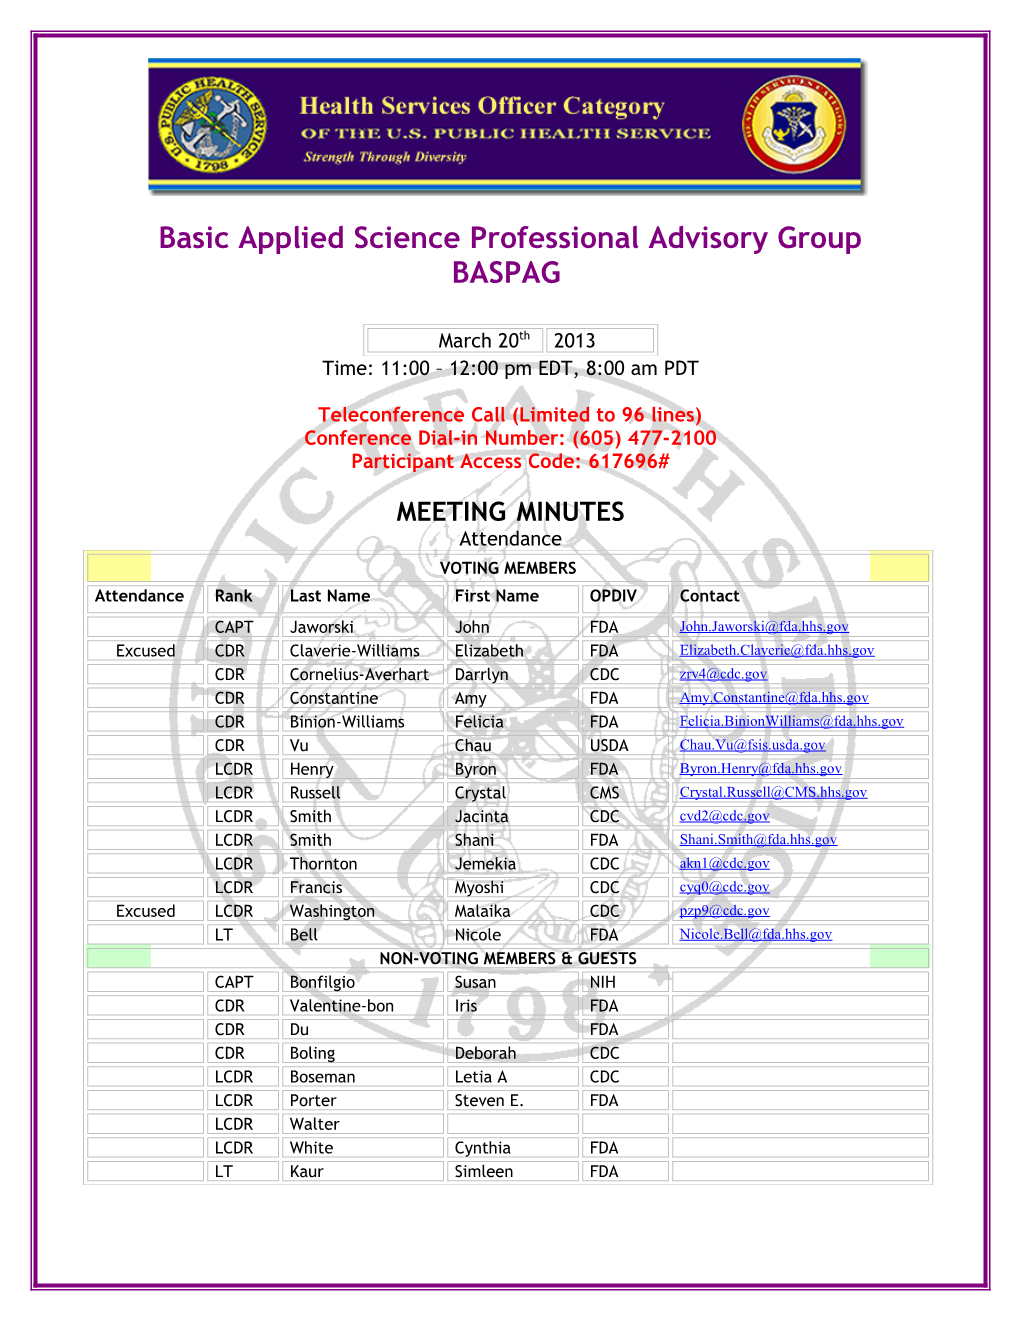 Basic Applied Science Professional Advisory Group